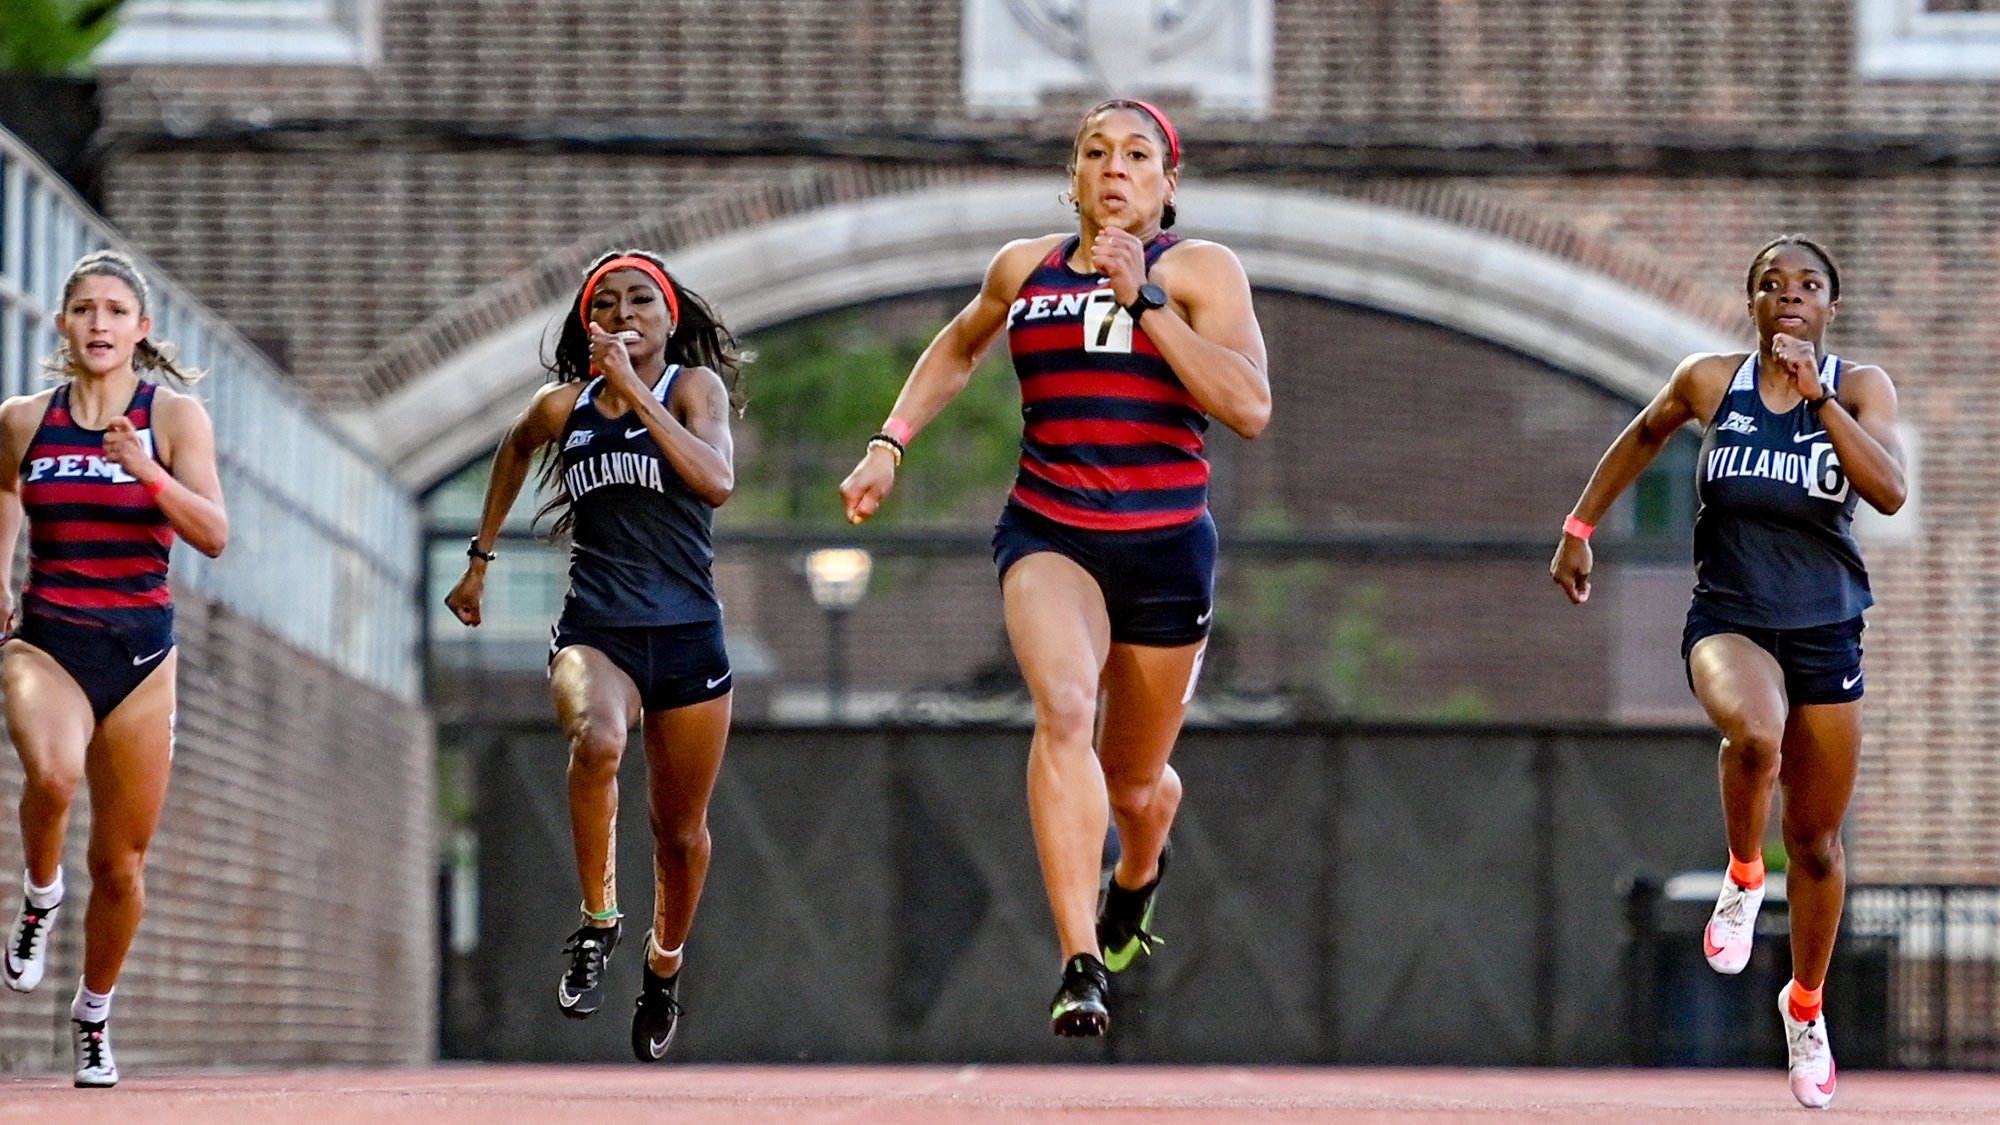 Isabella Whittaker funs in a race at Franklin Field.